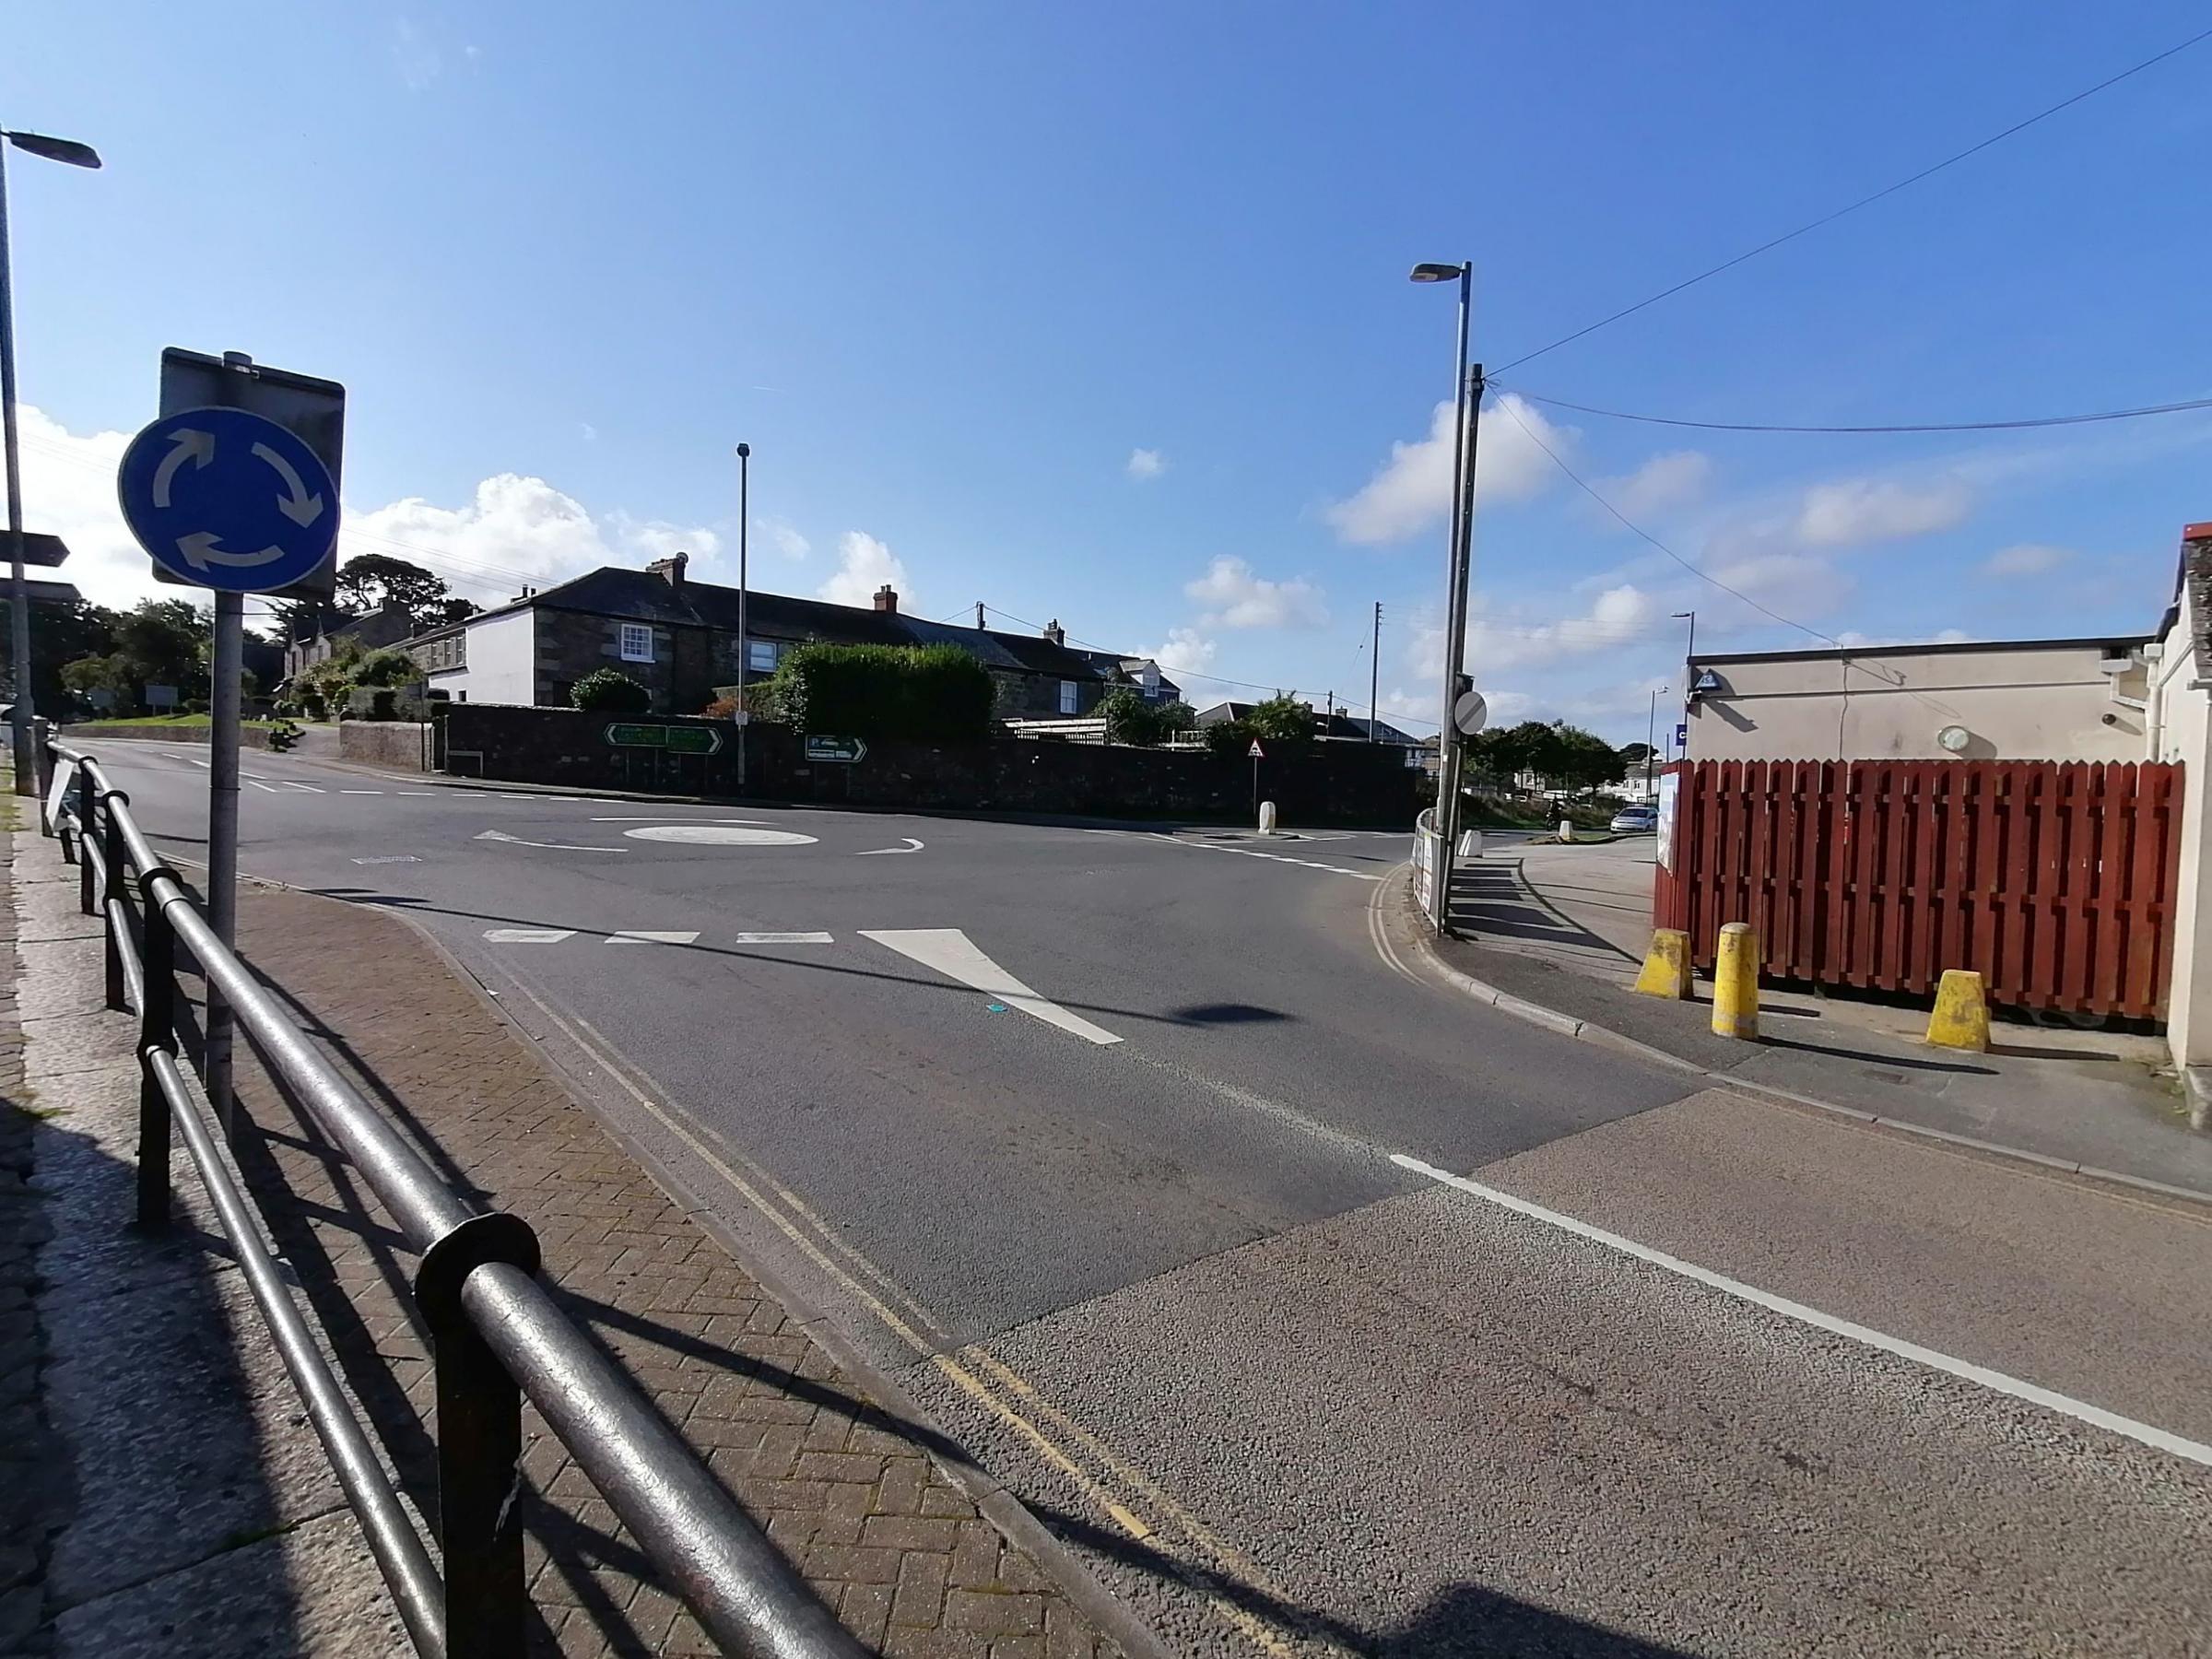 The roundabout by Spar in Helston would normally be filled with traffic on a Monday morning